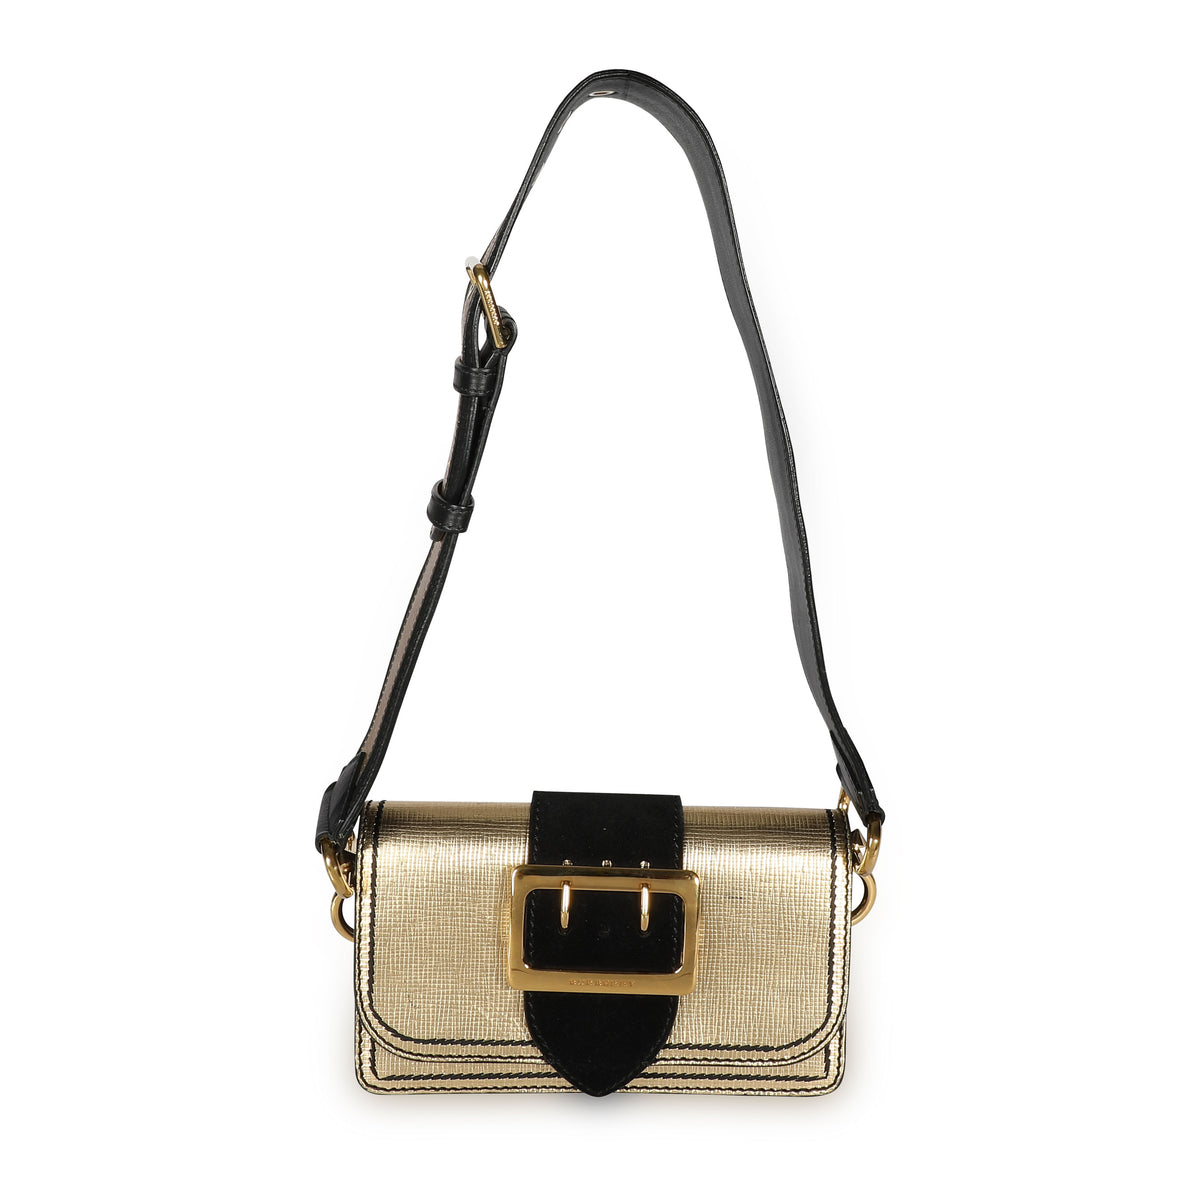 Burberry Gold Metallic Leather & Black Suede Madison Convertible Bag